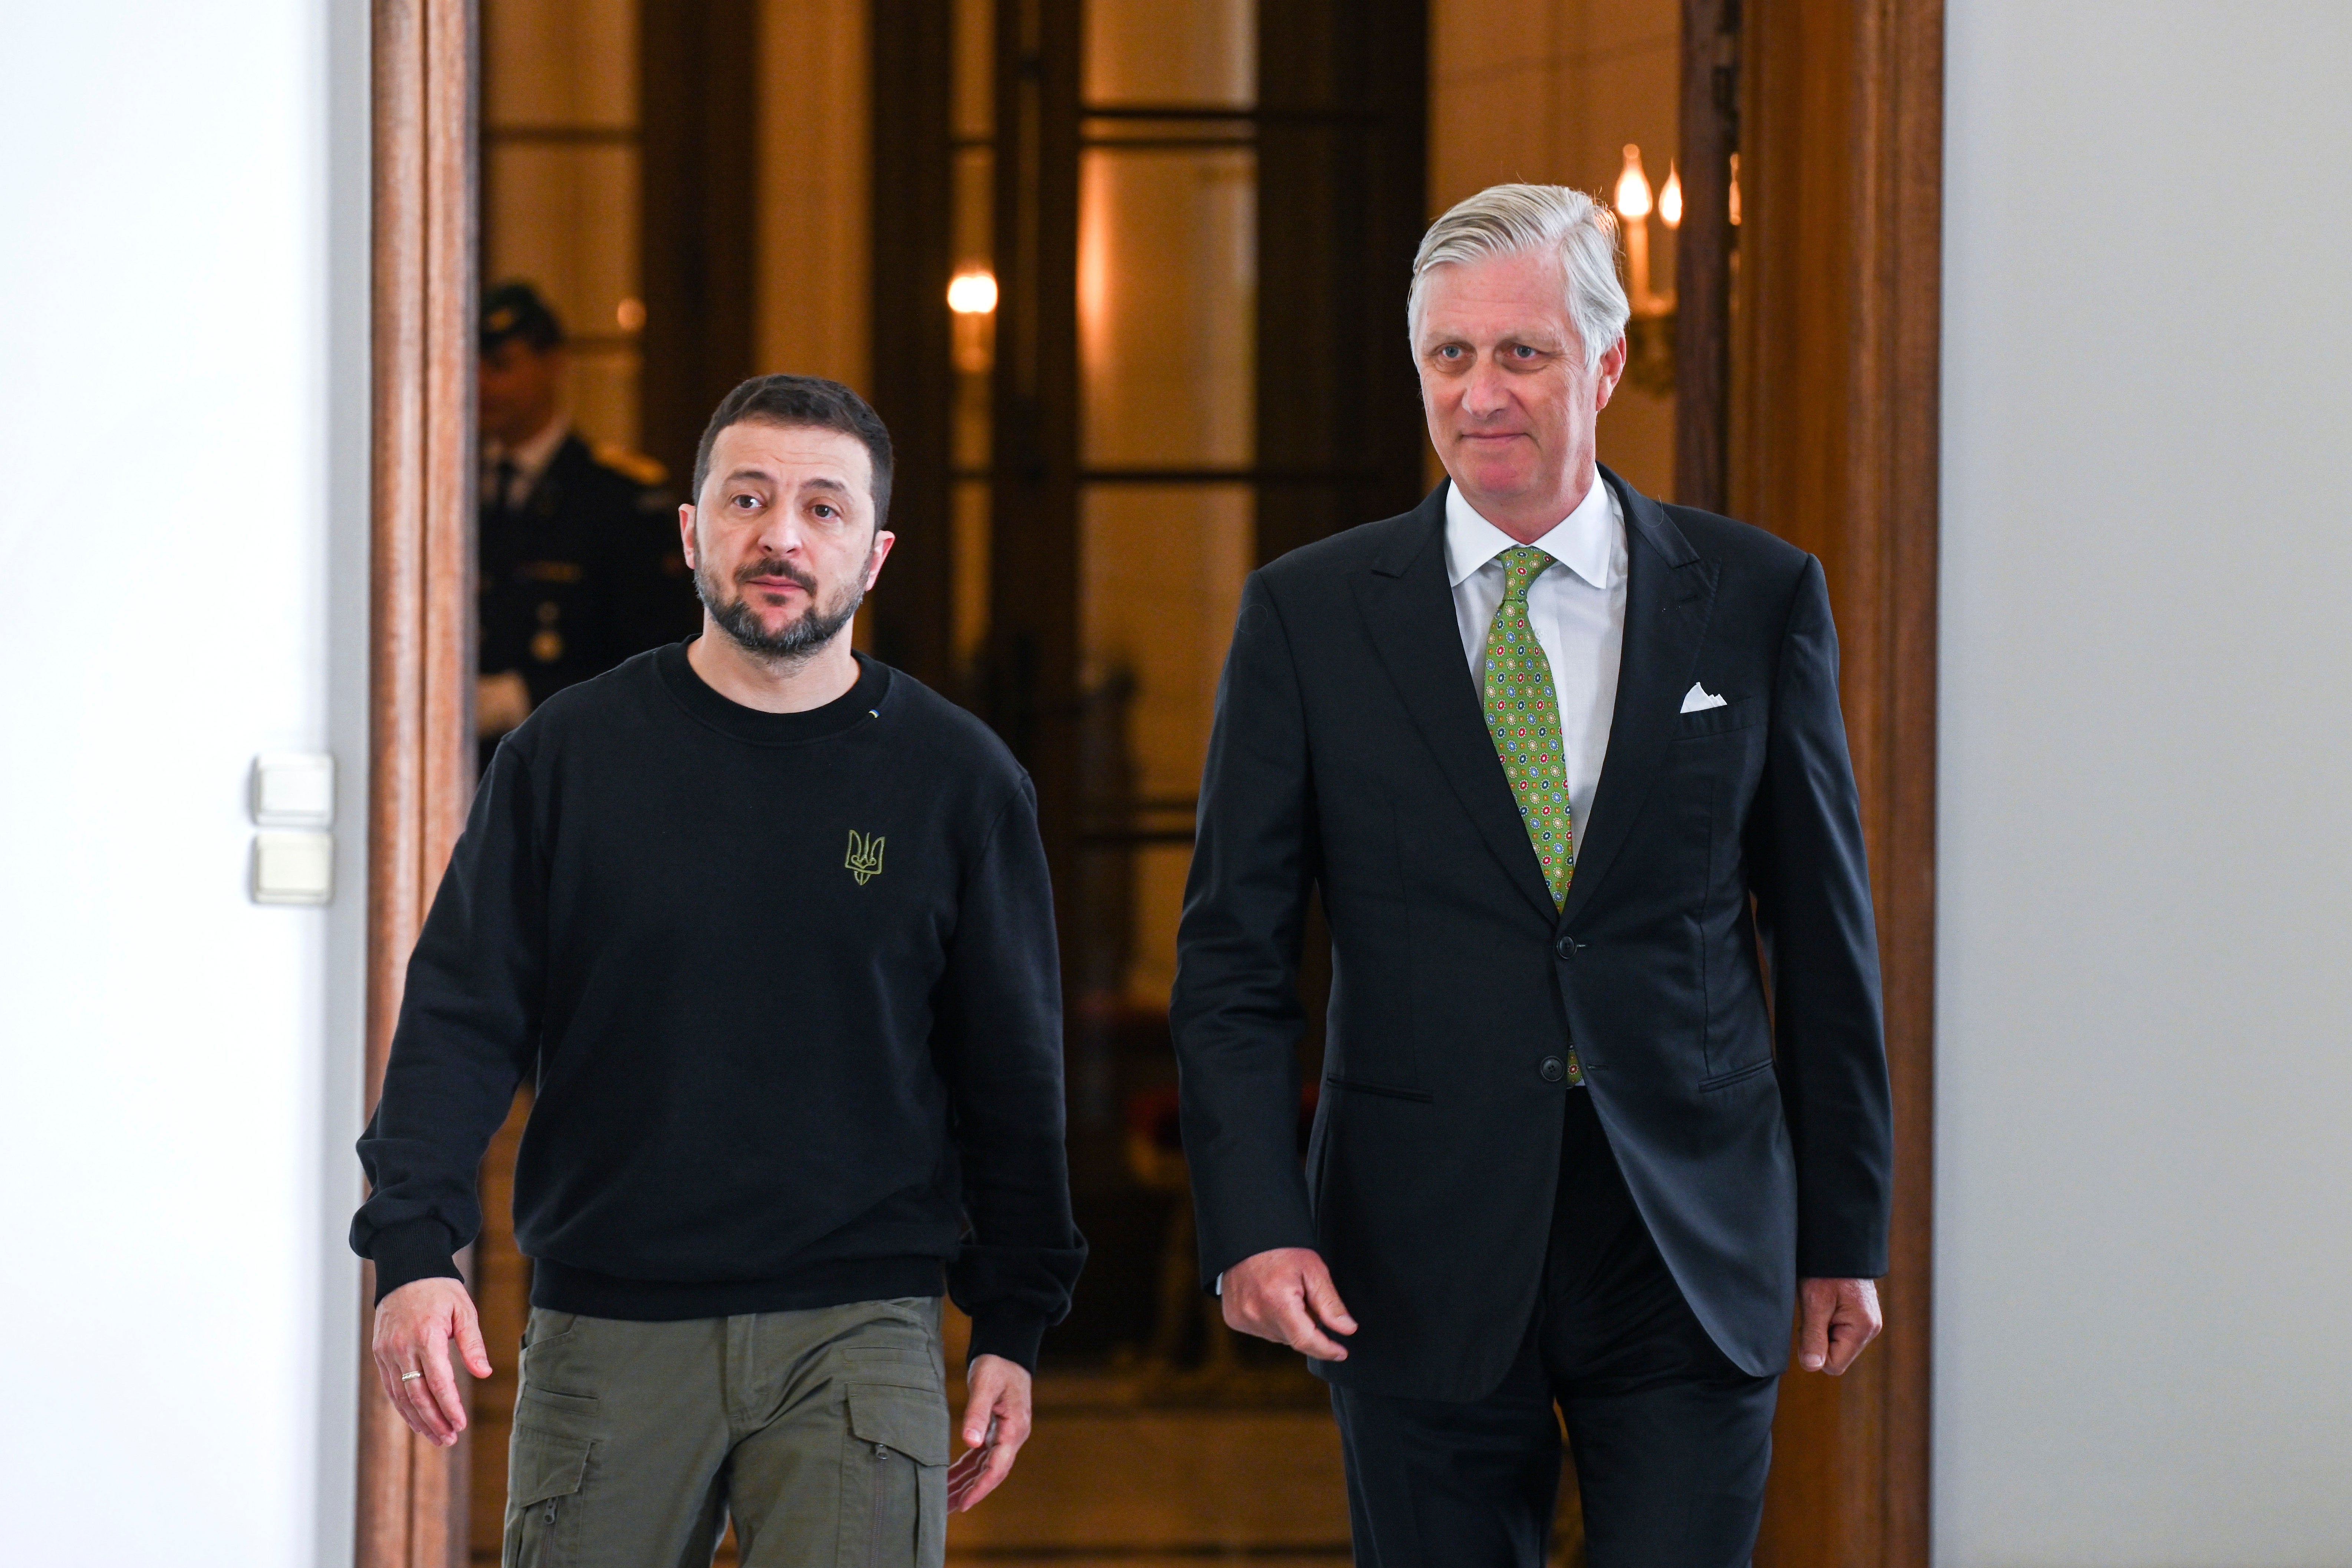 Belgium's King Philippe, right, walks with Ukraine's President Volodymyr Zelensky prior to a meeting at the Royal Palace in Brussels